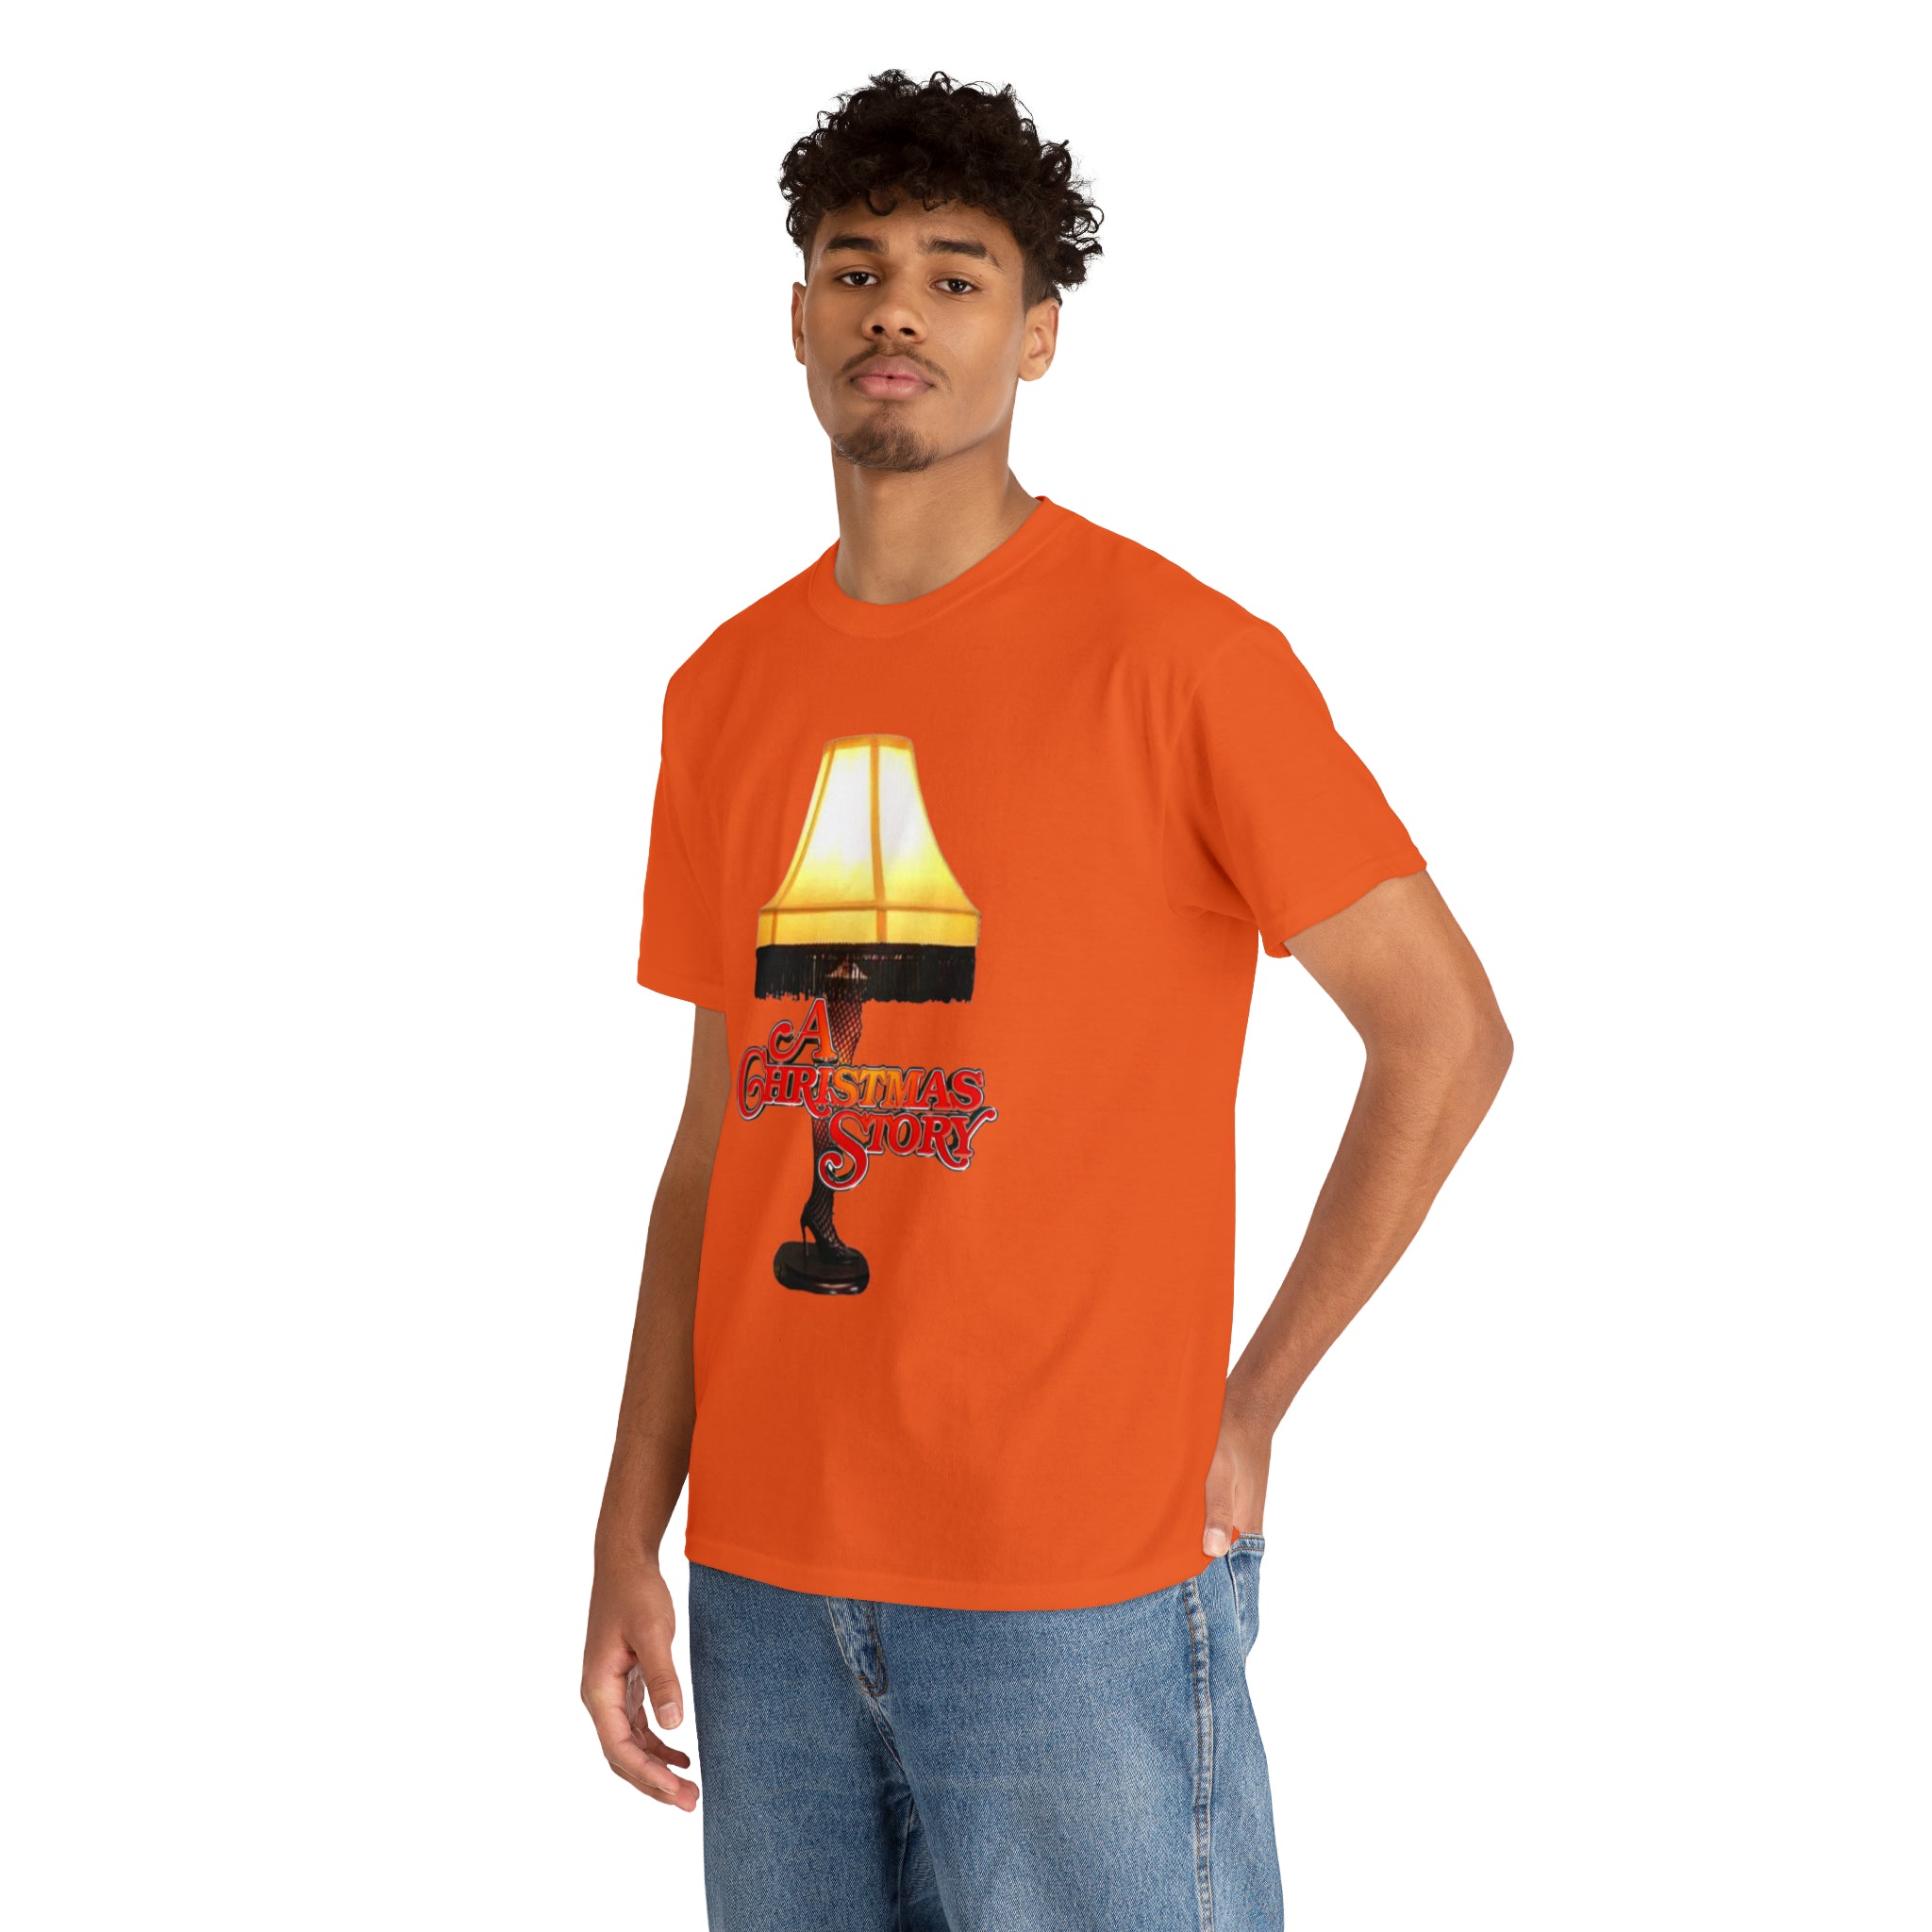 https://creationsbychrisandcarlos.store/products/a-christmas-story-leg-lamp-unisex-heavy-cotton-tee